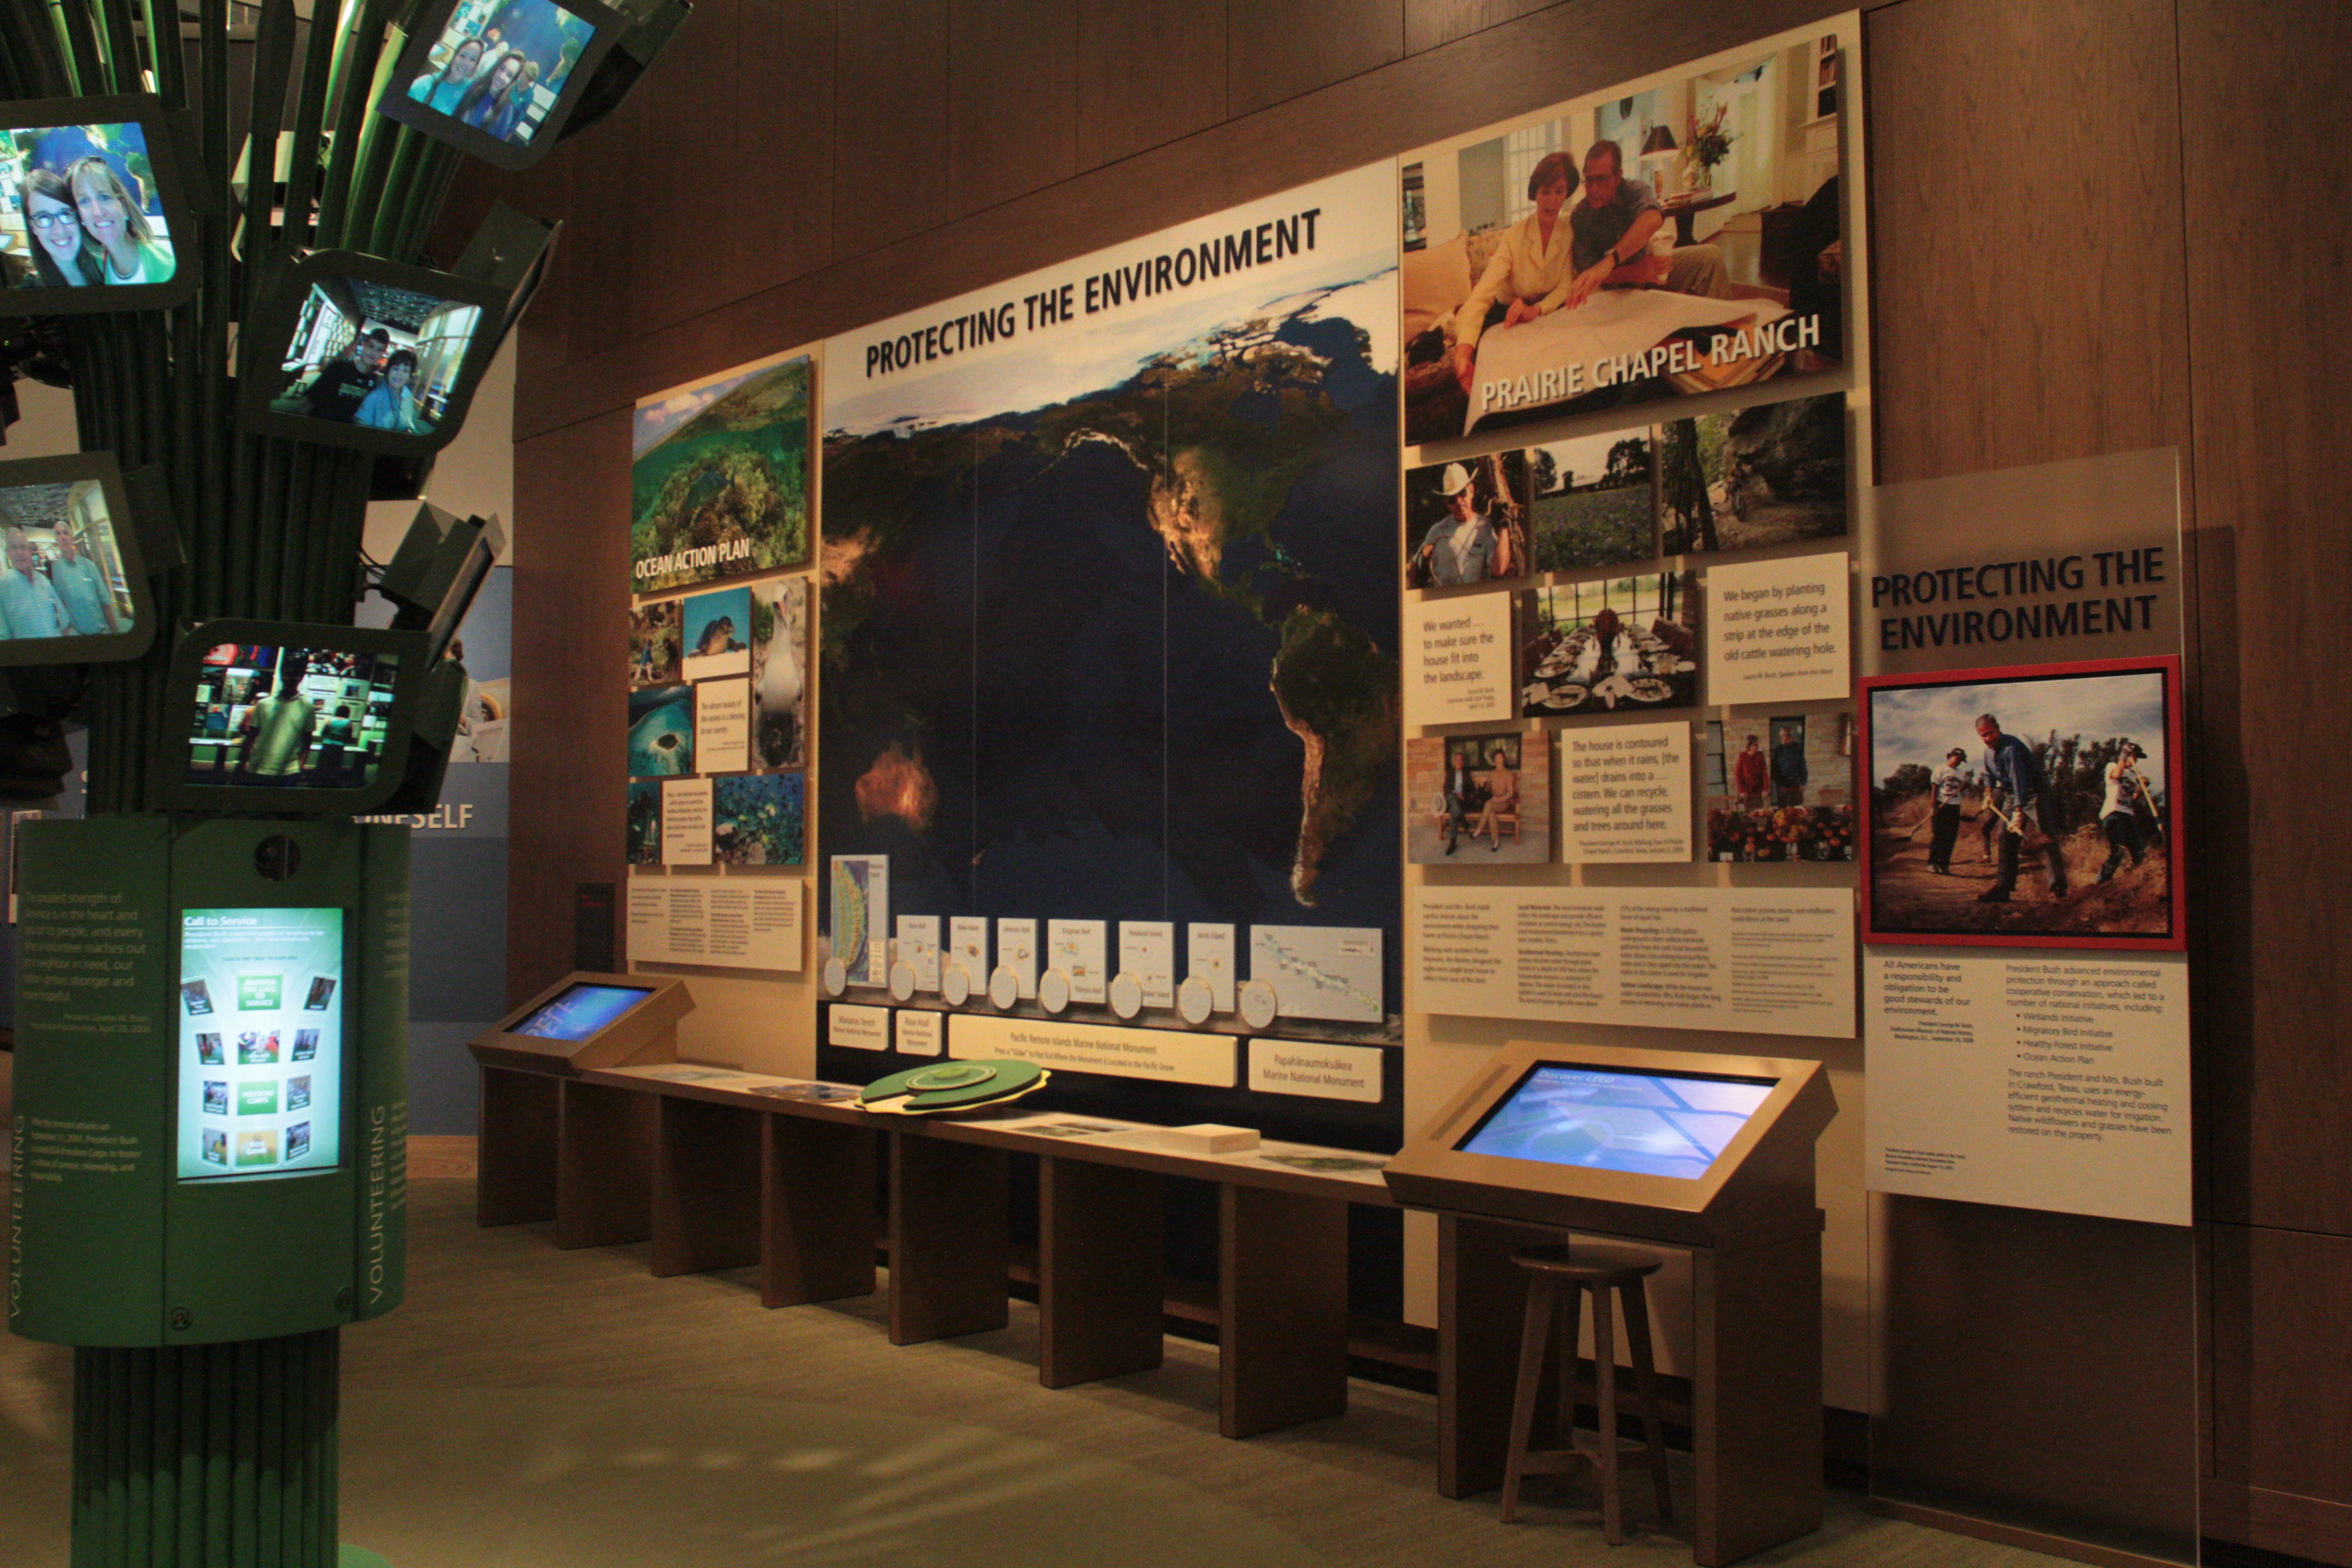 An image of the Protecting the Environment display at the George W Bush Museum